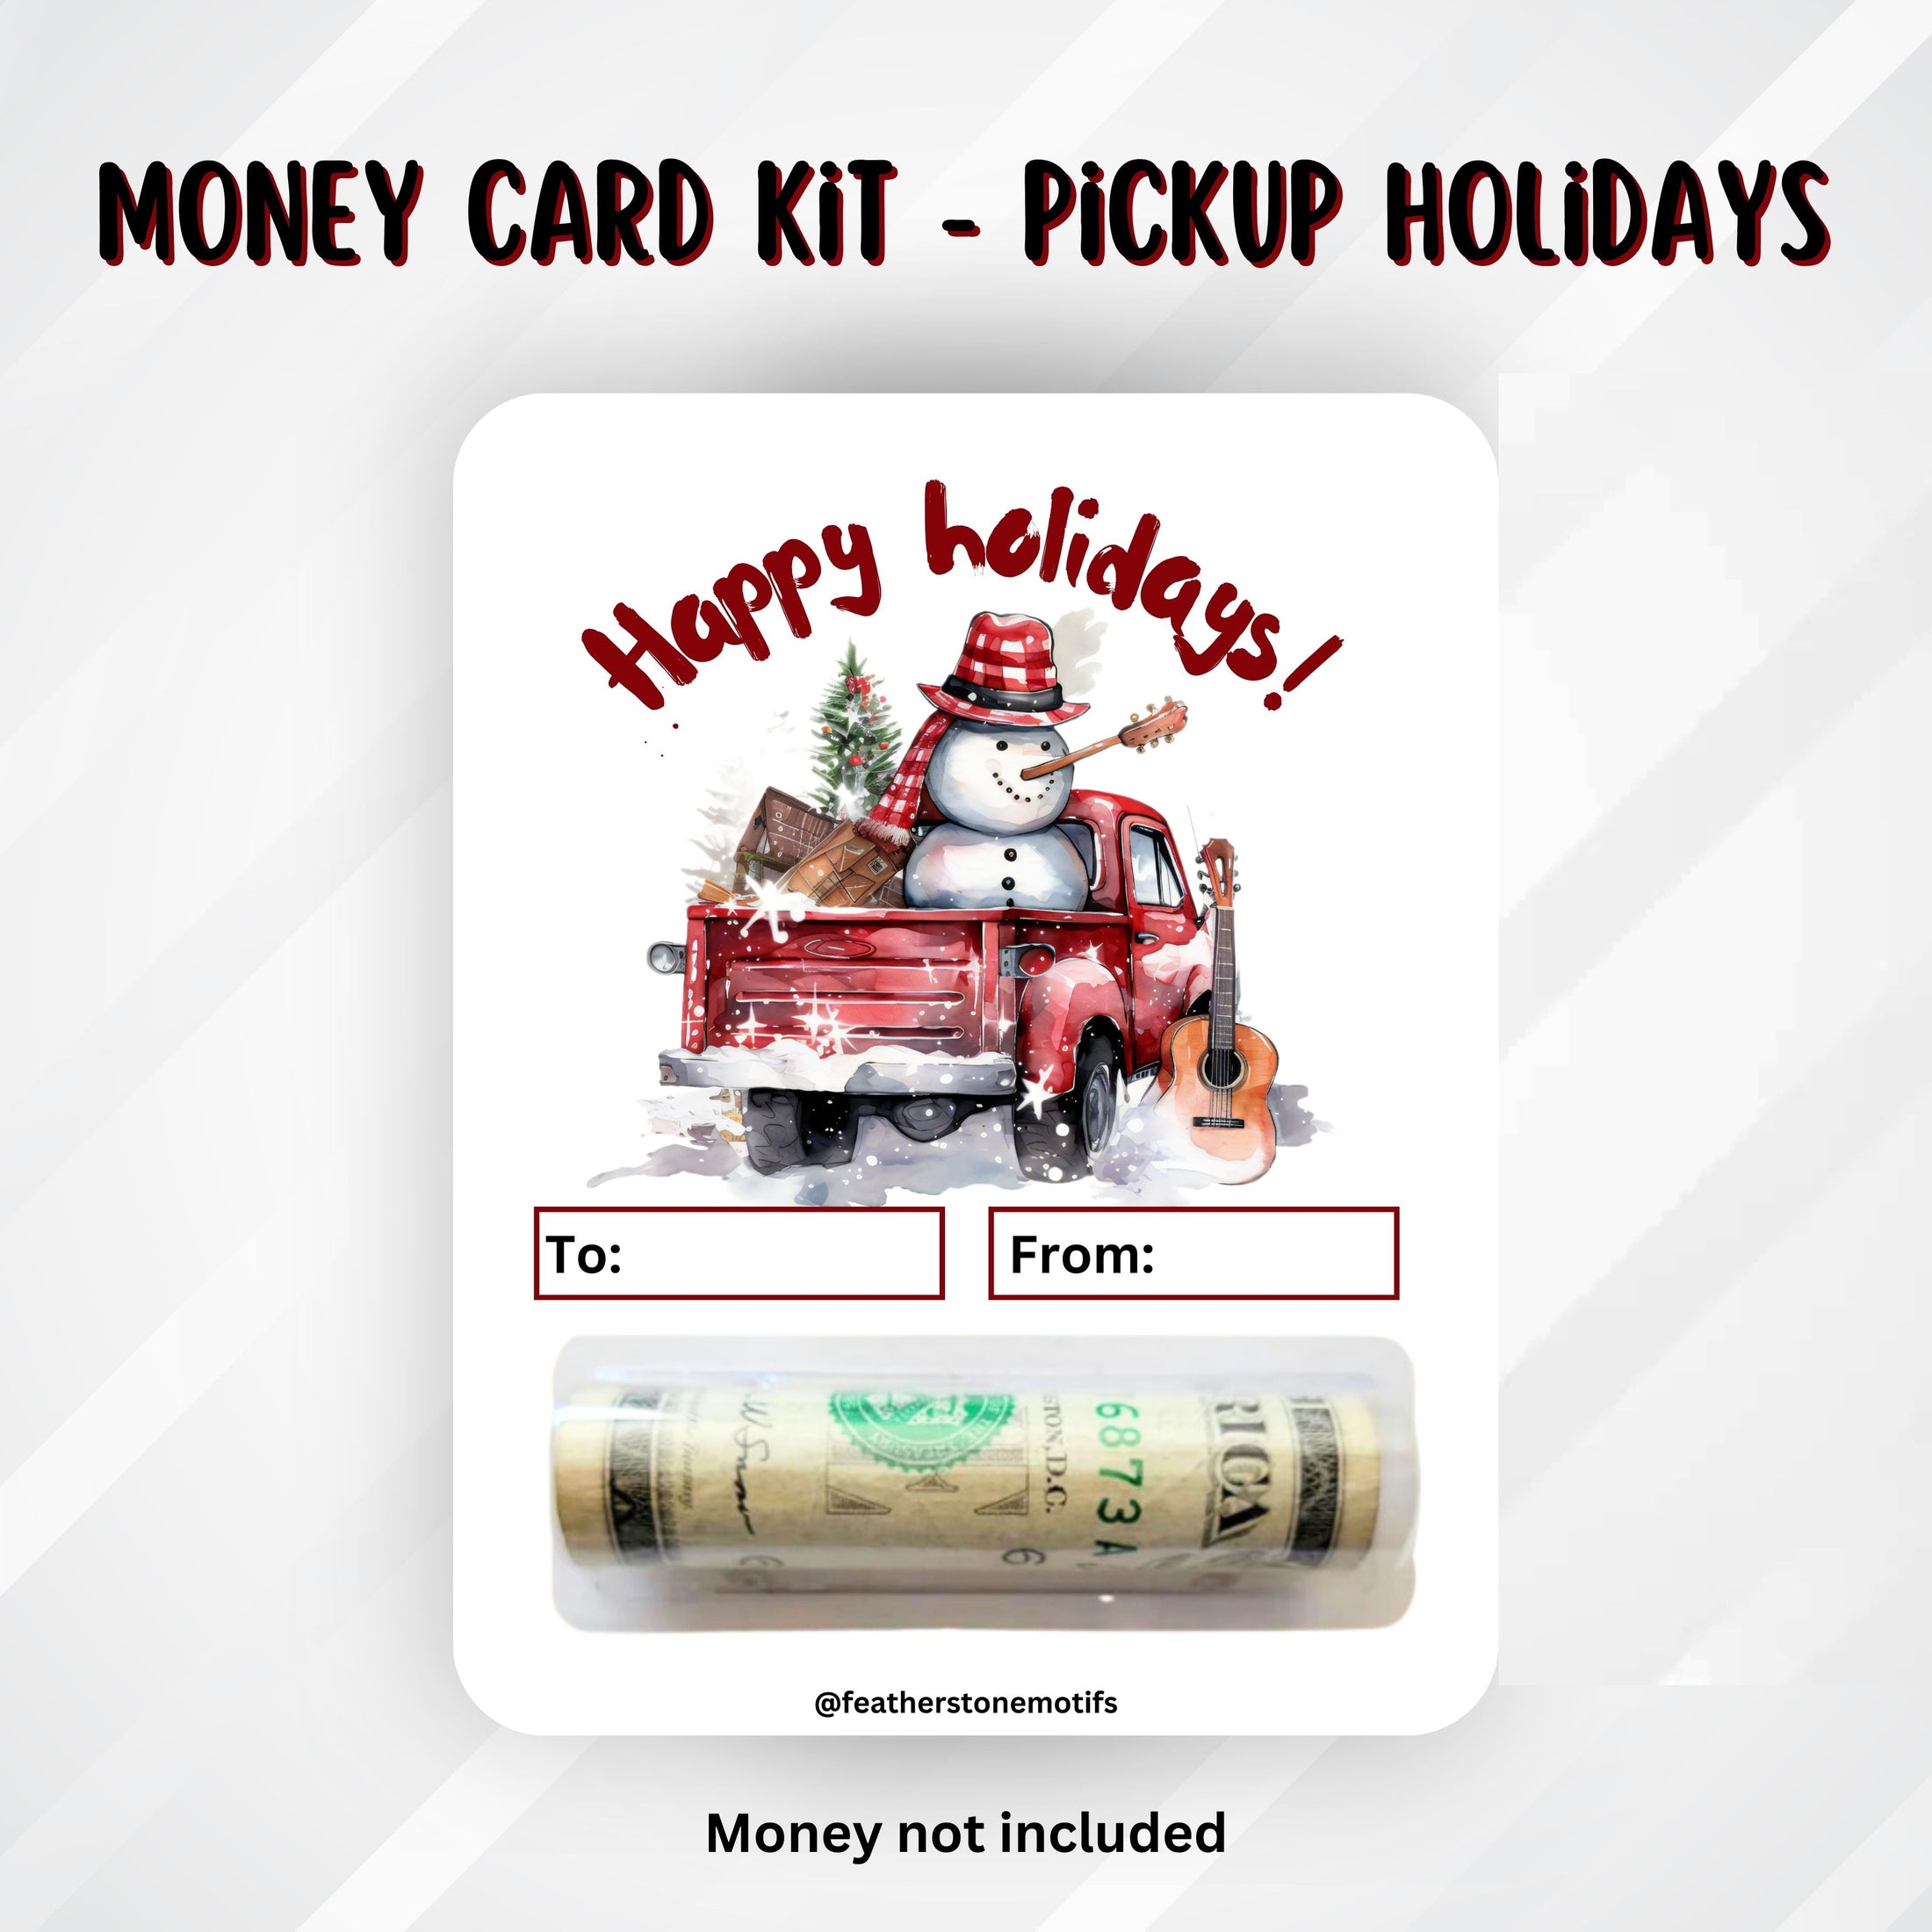 This image shows the money tube attached to the Pickup Holidays Money Card.